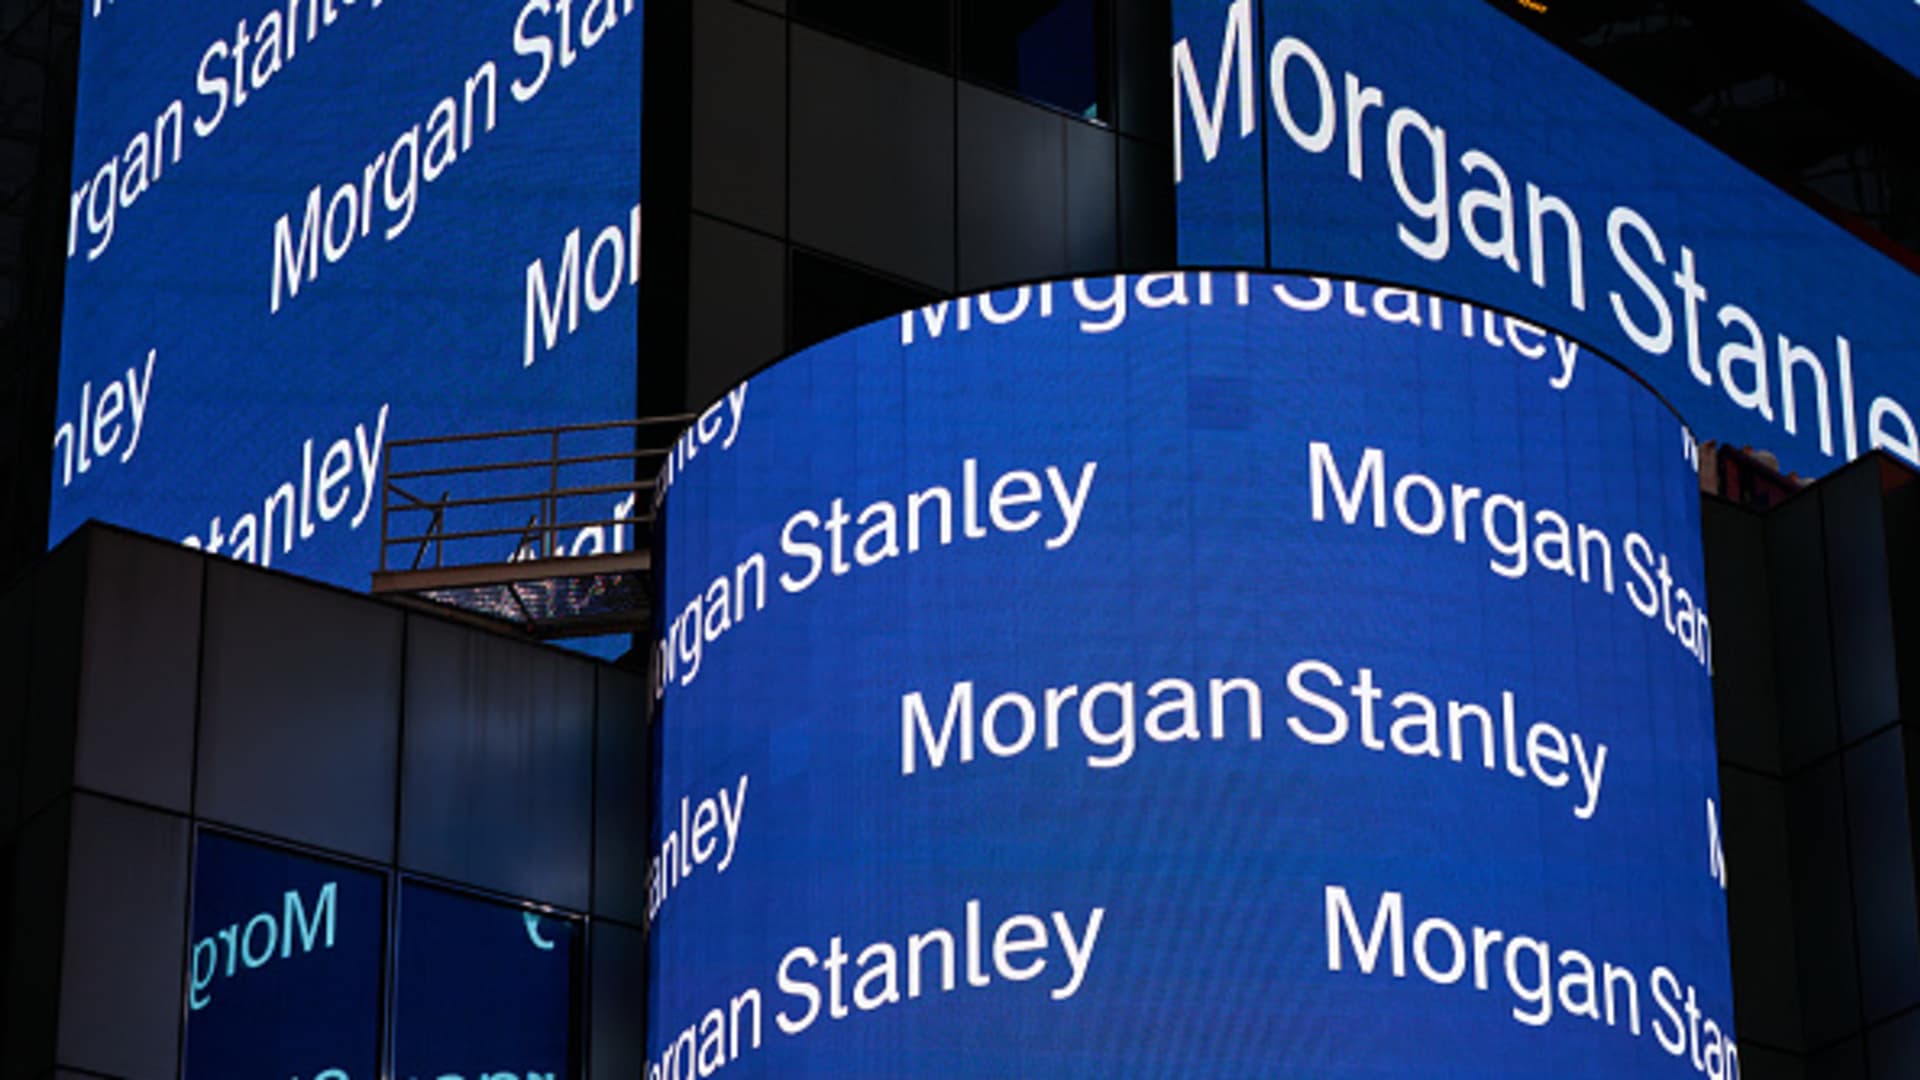 Morgan Stanley names ‘highest quality’ inventory picks in emerging markets